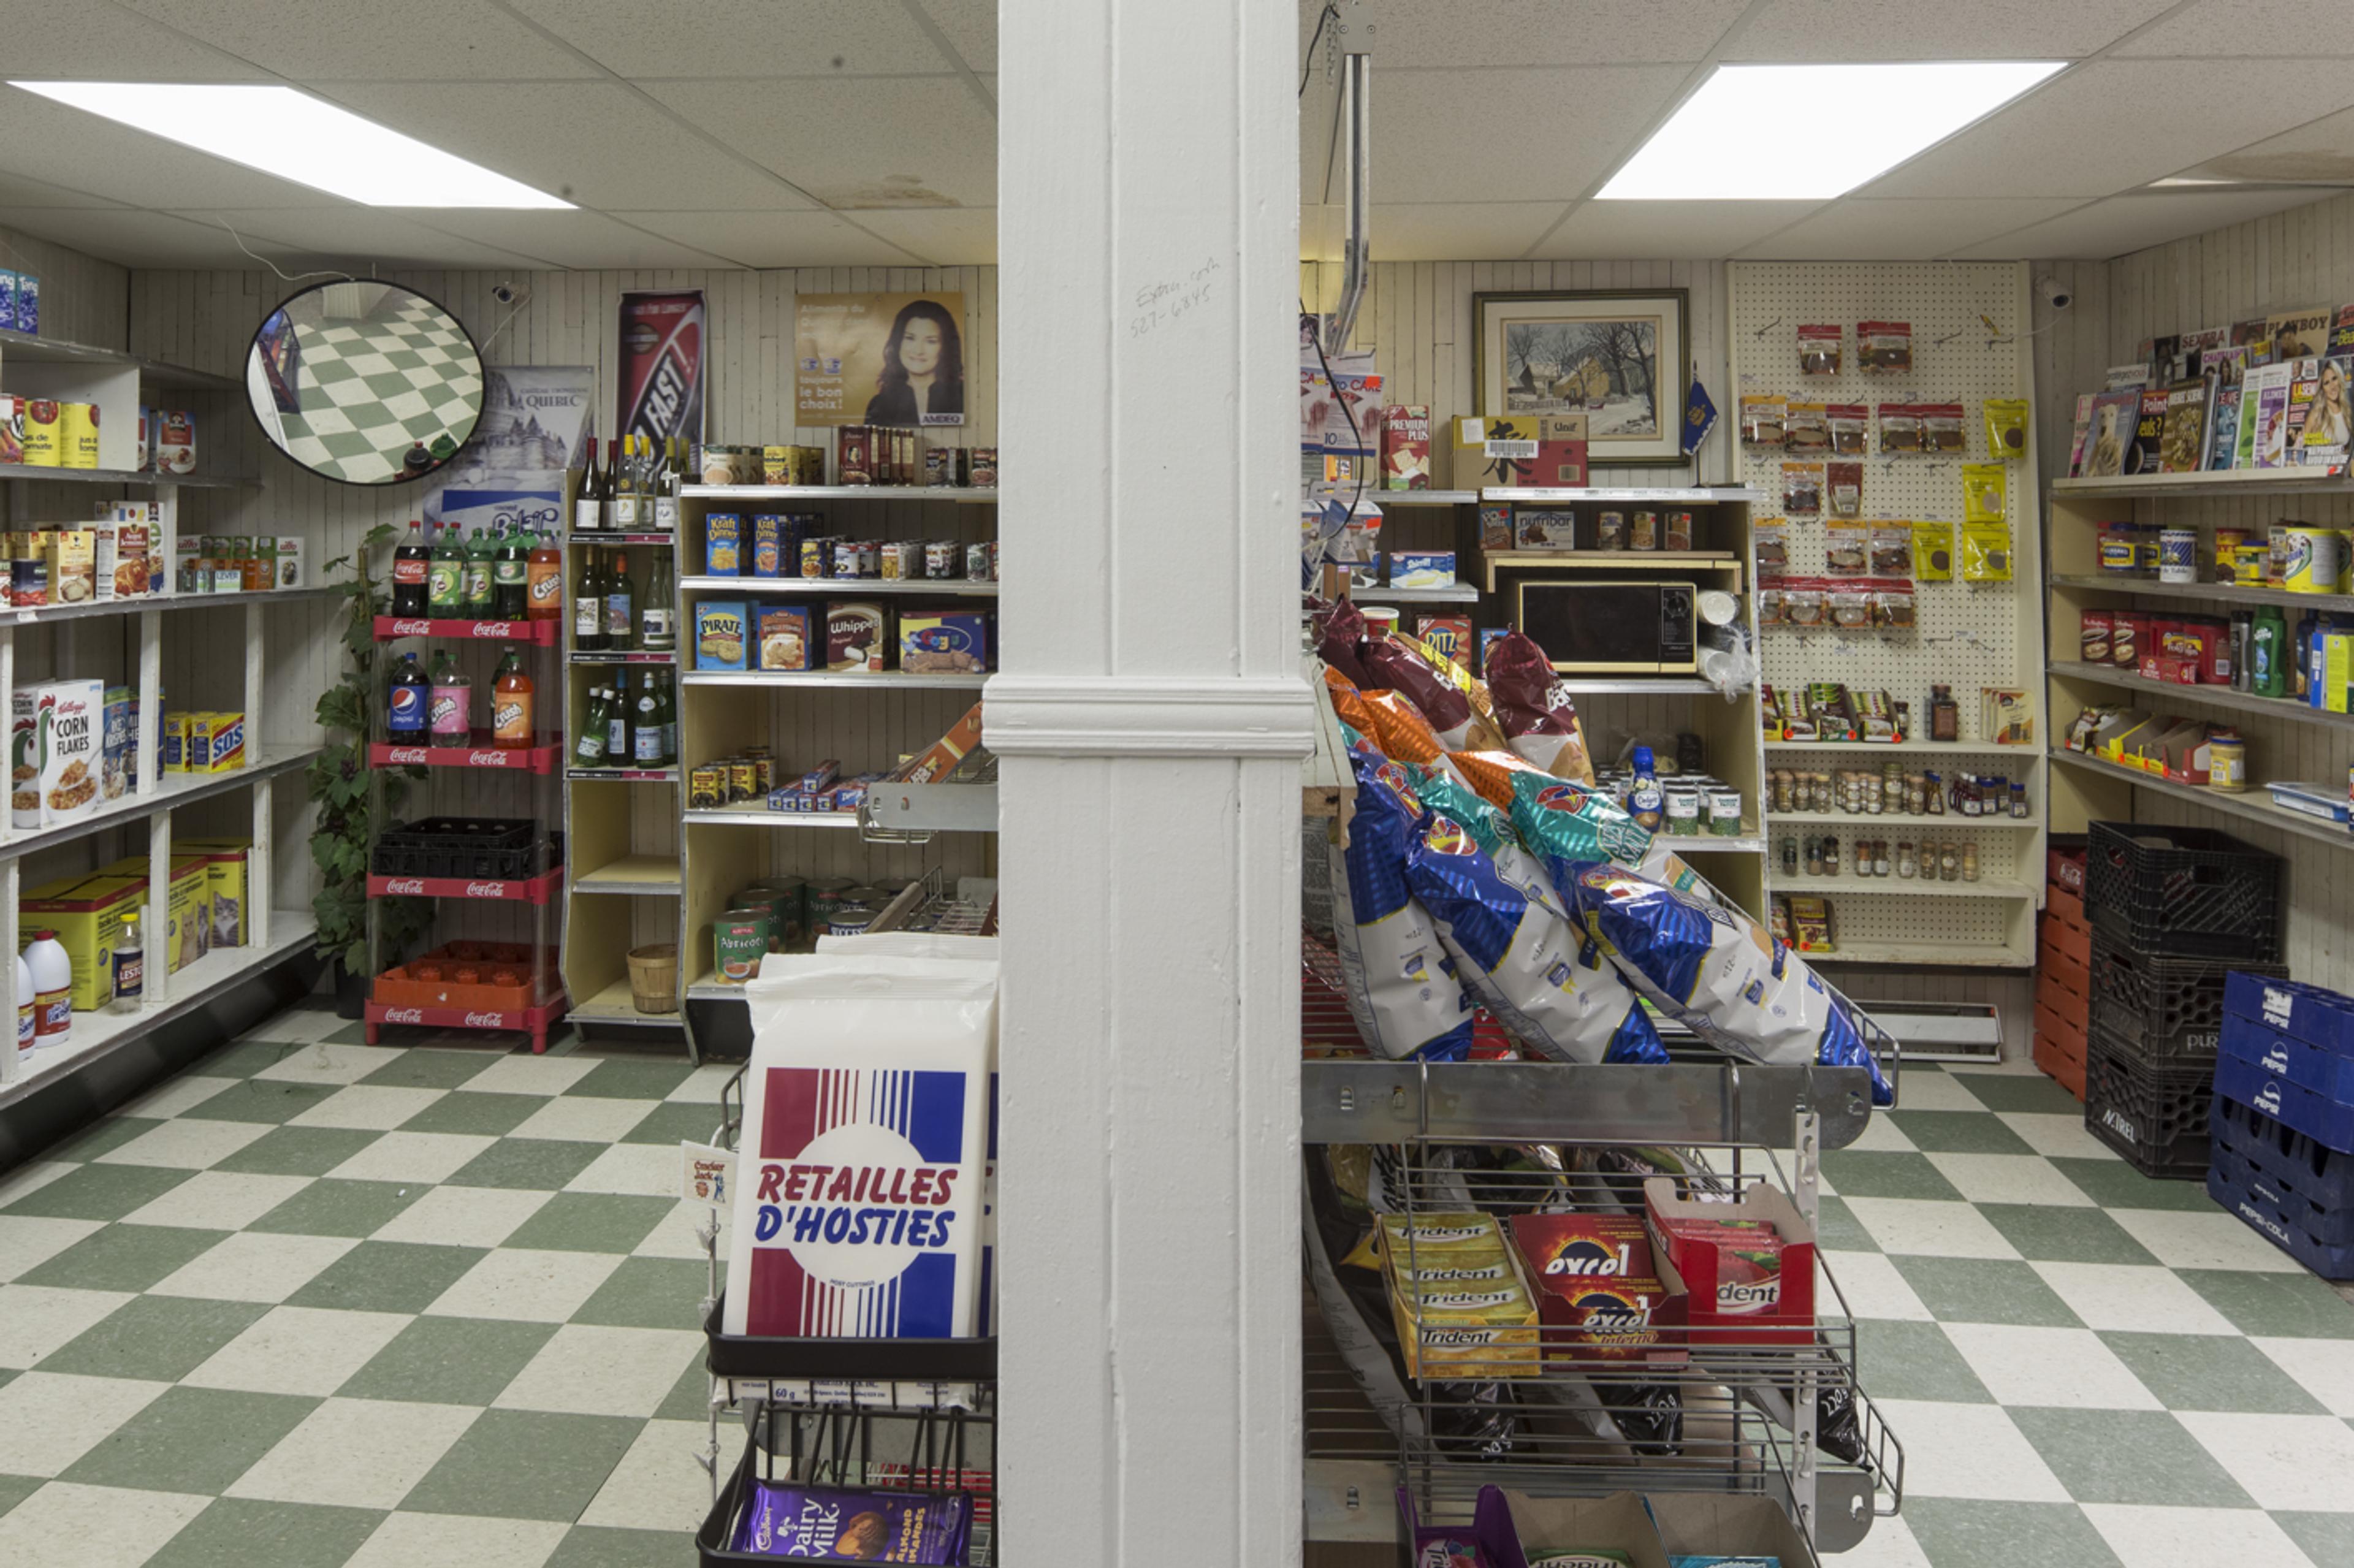 The inside of a convenience store.